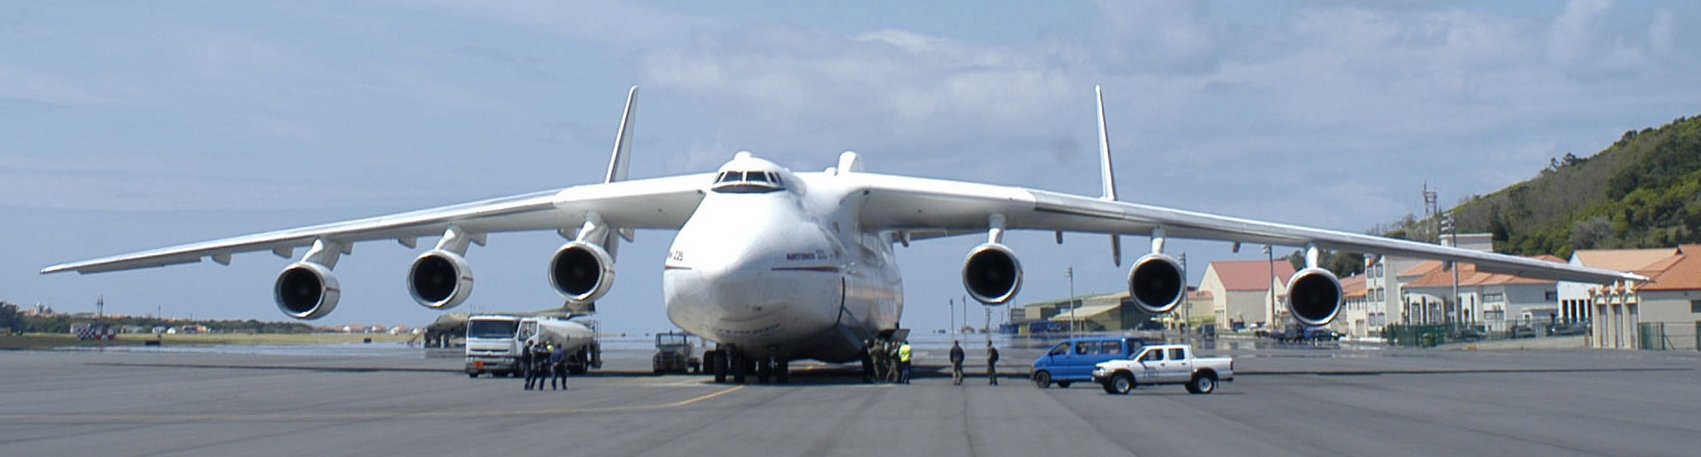 An-225_front_day_V1.jpg